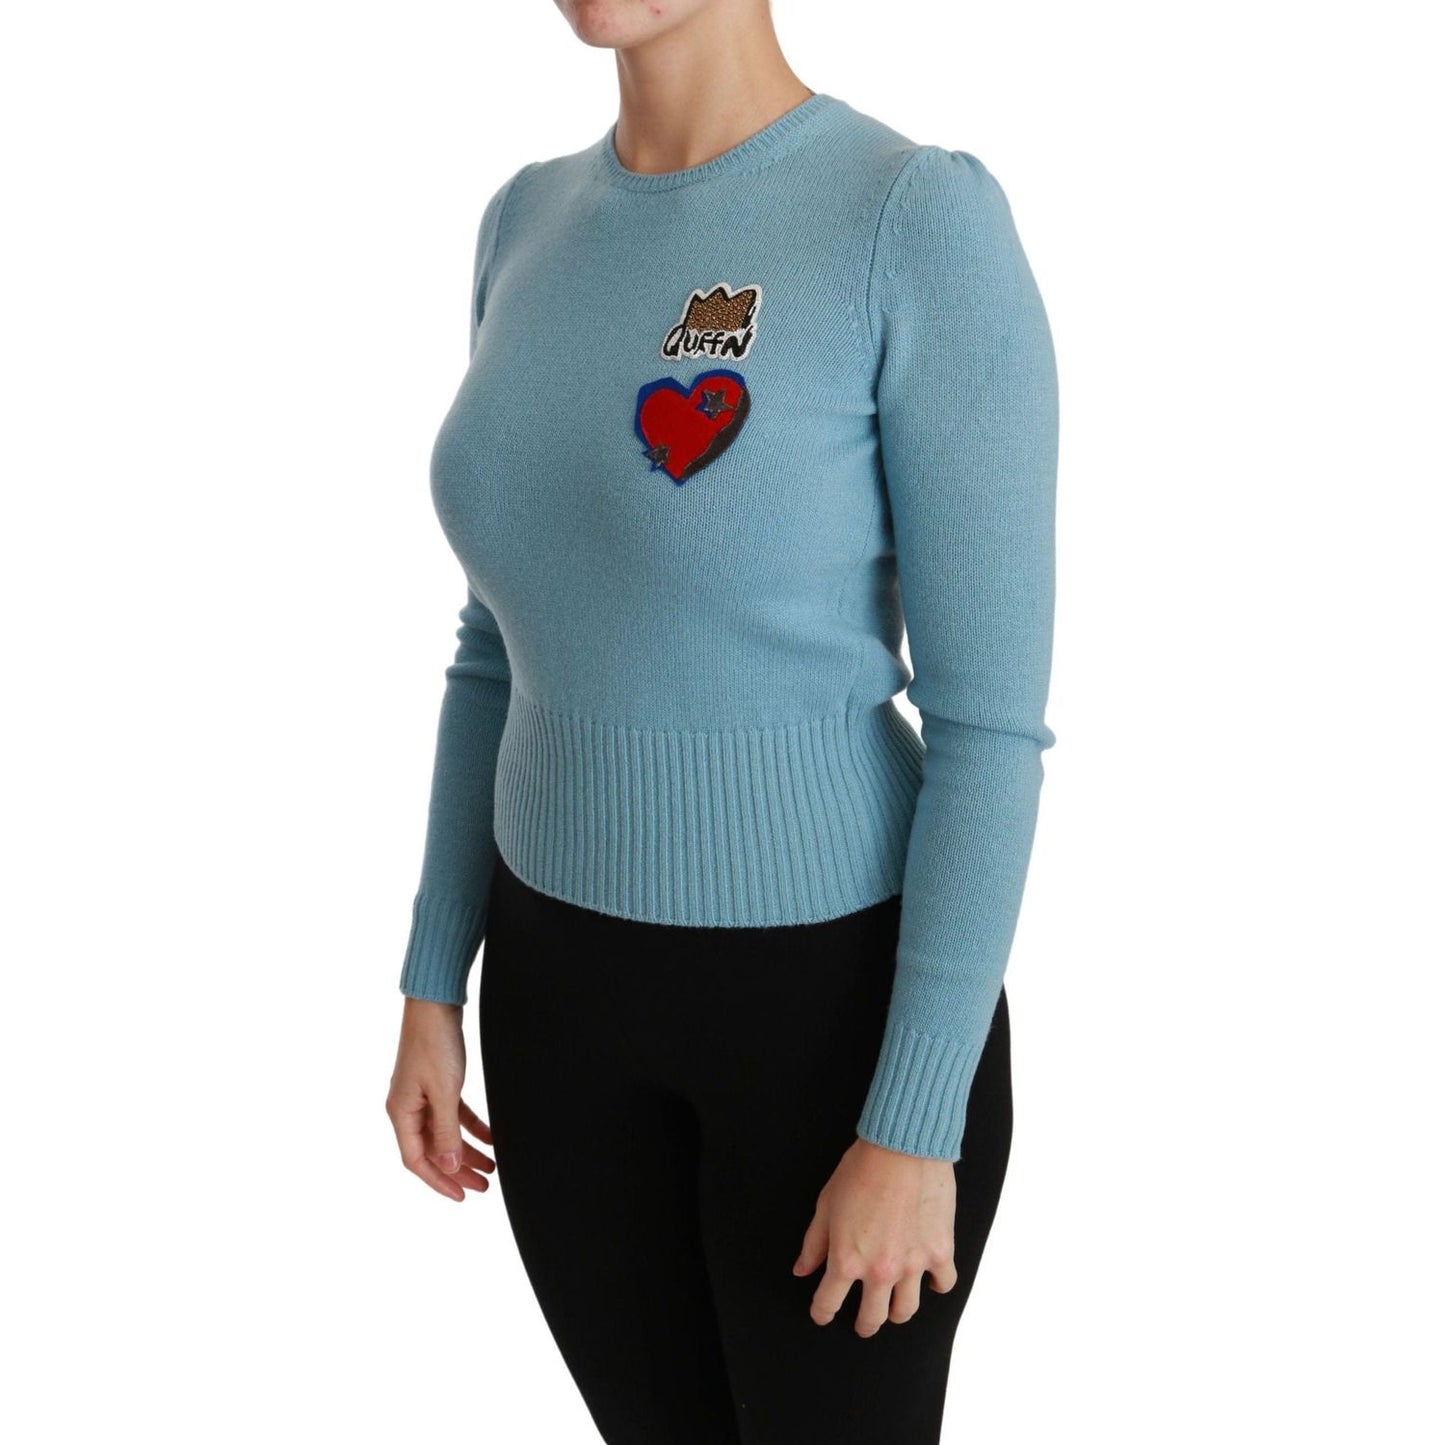 Dolce & Gabbana Queen Heart Beaded Wool Sweater WOMAN TOPS AND SHIRTS blue-wool-queen-heart-pullover-sweater IMG_7178-scaled-8998d103-a00.jpg